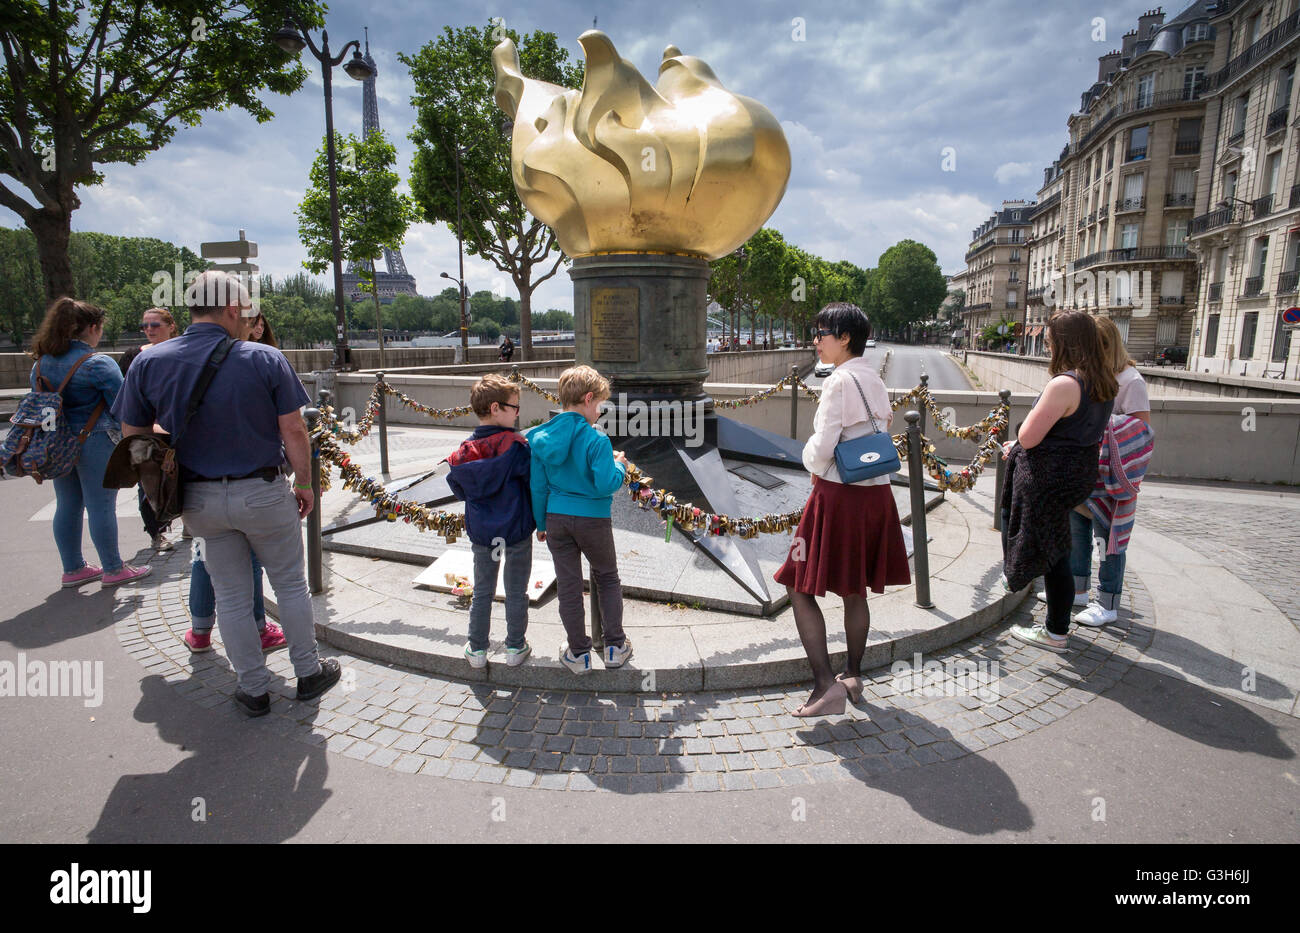 Paris, France. 19th May, 2016. Tourists stand on the square of Pont d'Alma (bridge of souls) in Paris, France, 19 May 2016. Princess Diana's fatal accident happened here on 31 August 1997 and ever since the site of the accident has become a pilgrimage site for Paris tourists. Photo: Peter Kneffel/dpa/Alamy Live News Stock Photo